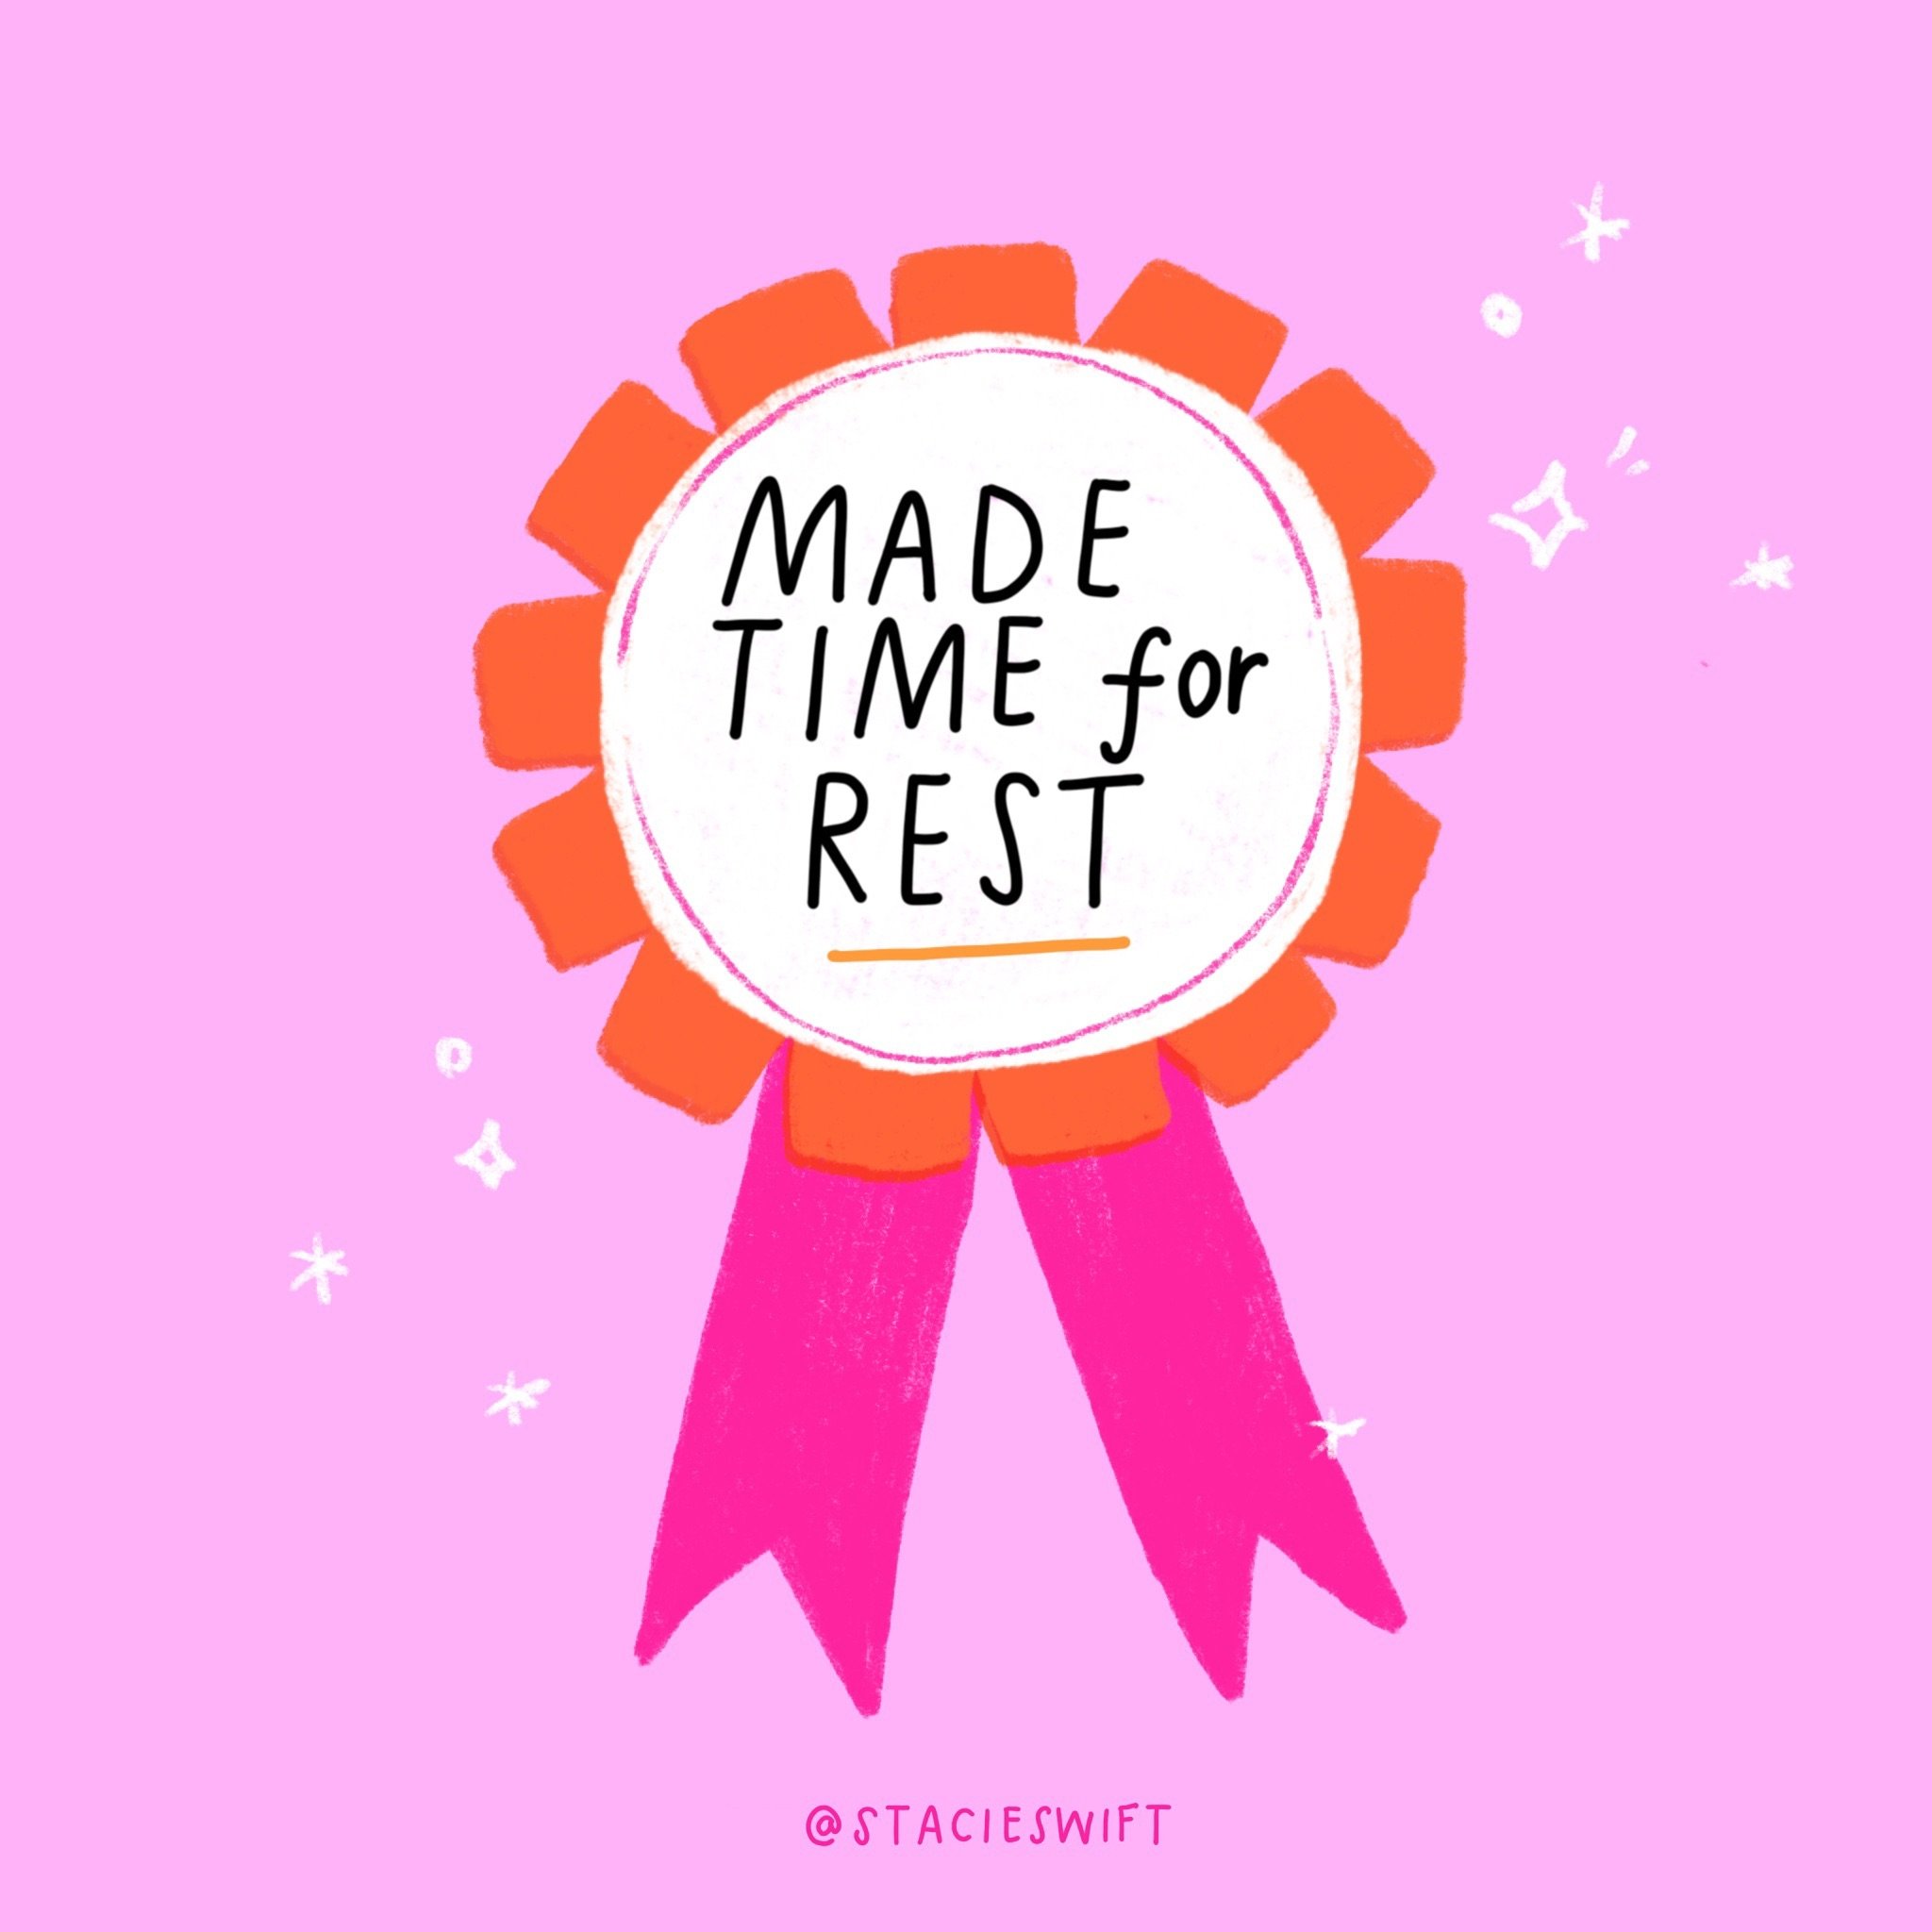 🌟 Rest is important too! 🌟

I&rsquo;ve fought the urge to plan and schedule and be super busy this week. 

We have had very few commitments, pyjama days, lazy mornings, time to get bored and go slow and just exist.

Most weeks our days are spent ru